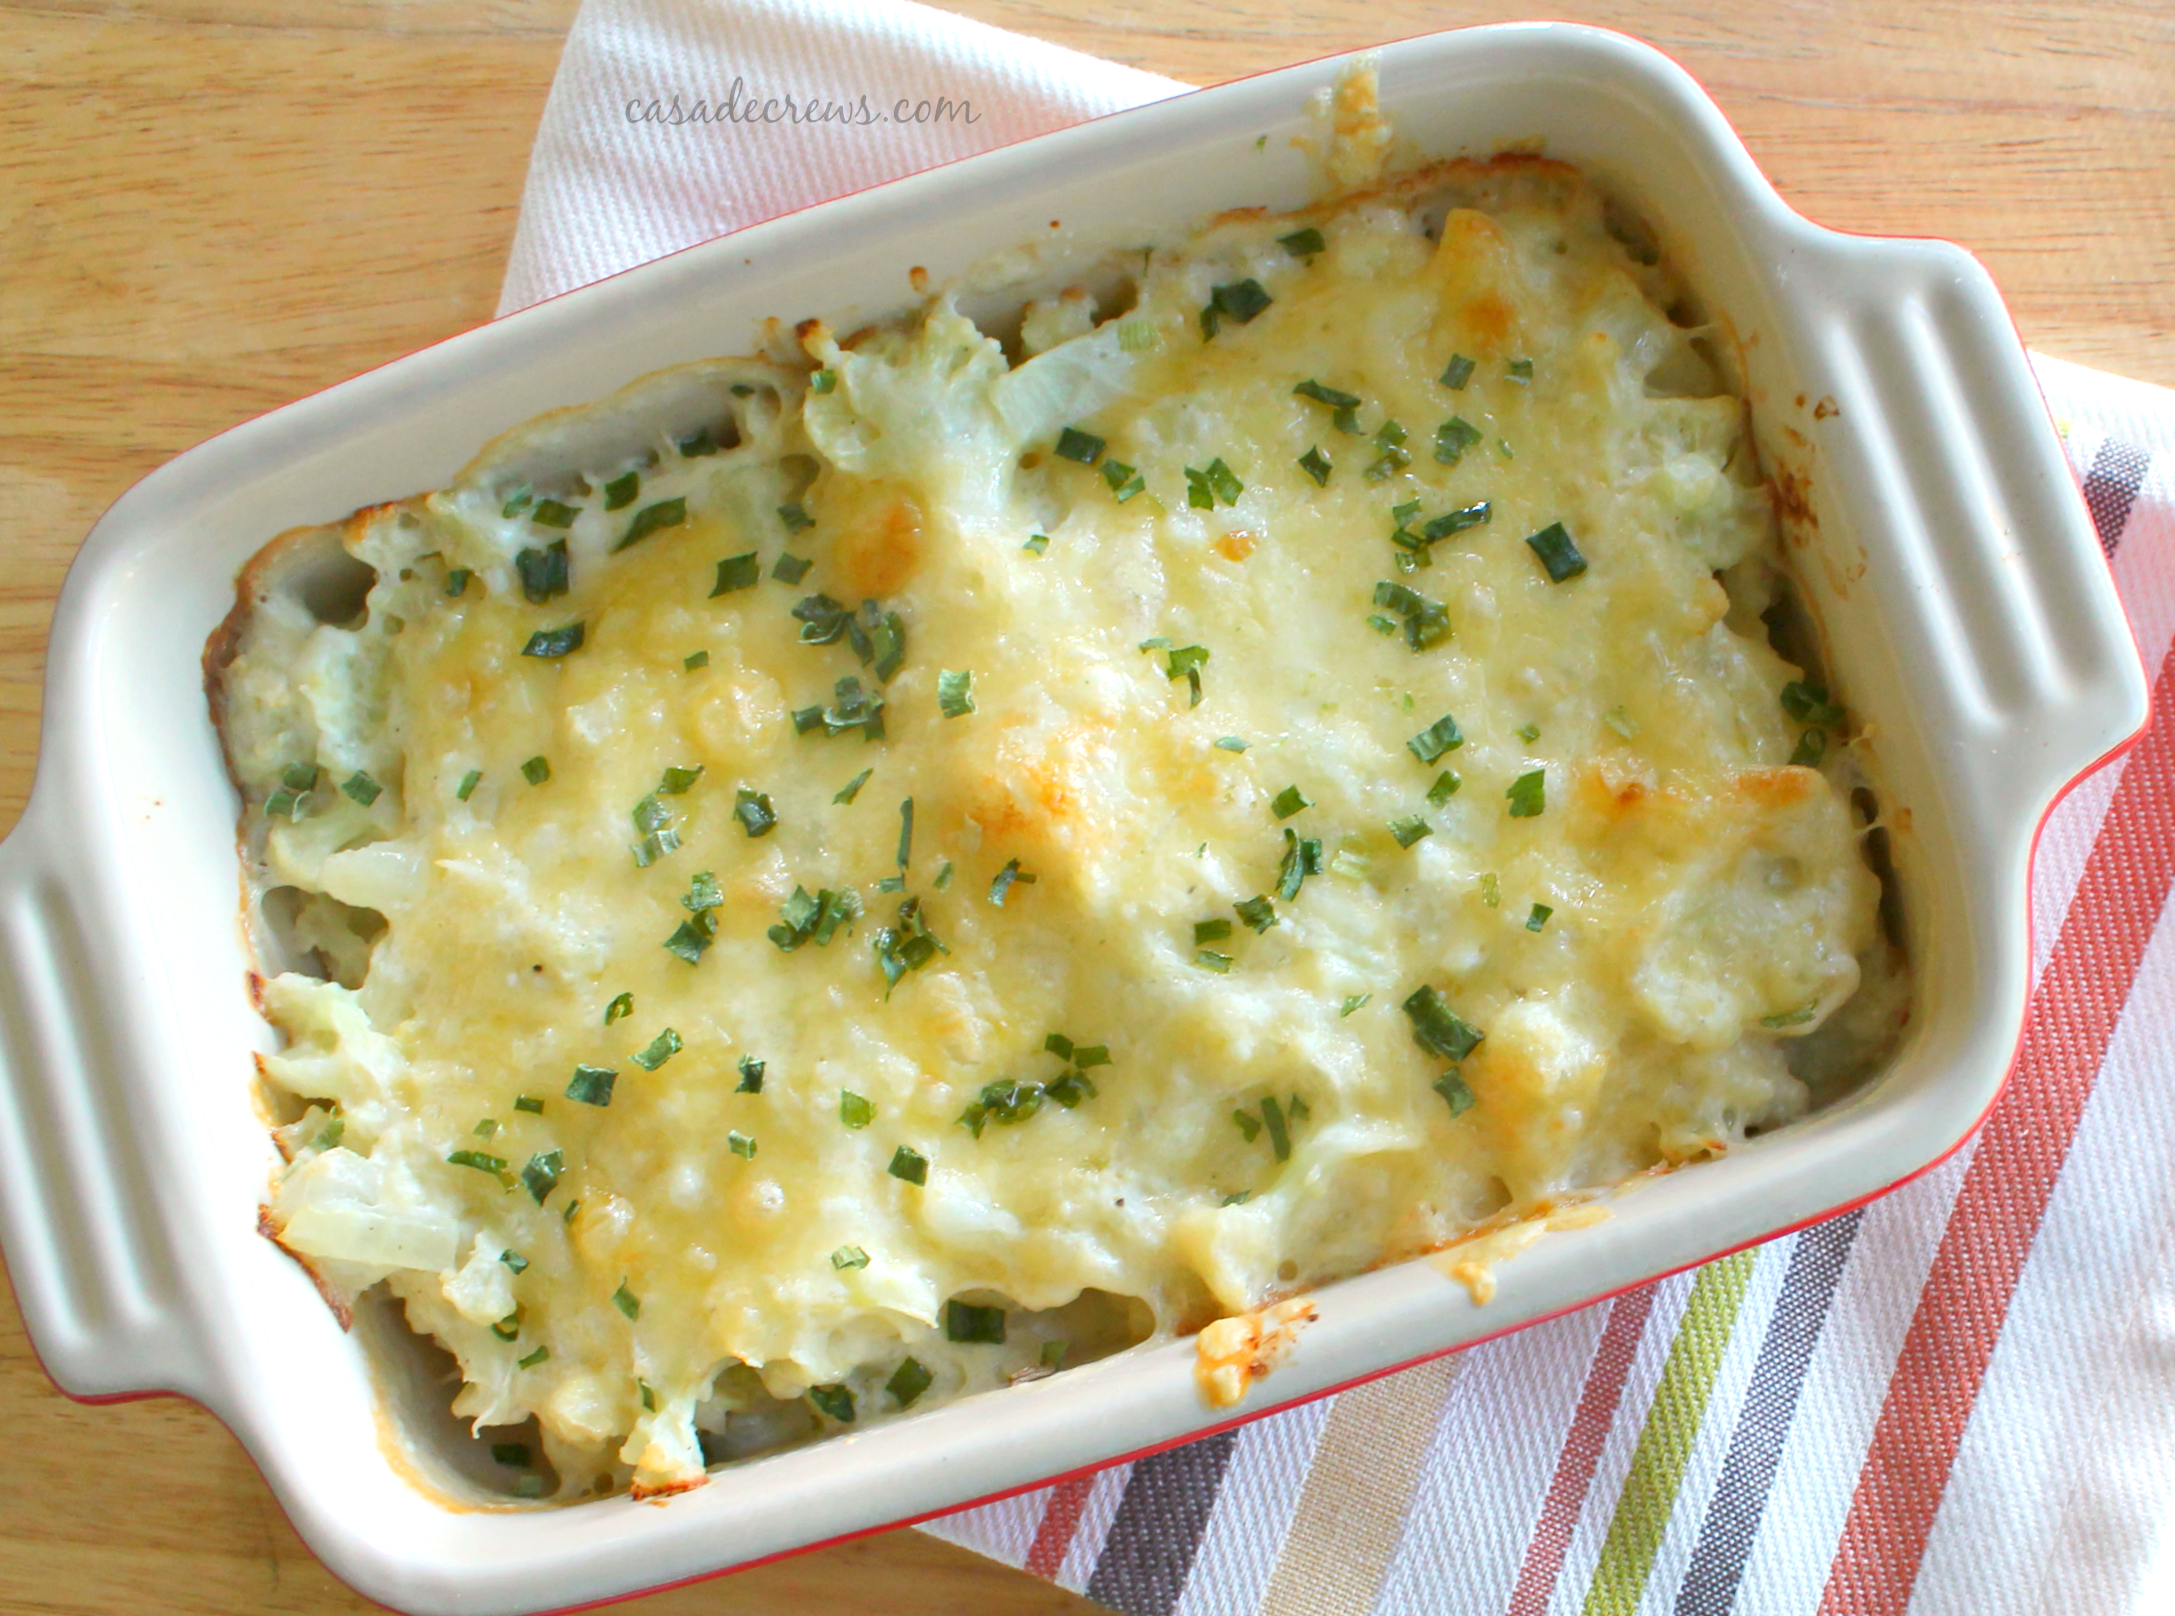 Yes, we'll have mashed 'taters, but we'll also have this creamy, cheesy, side!